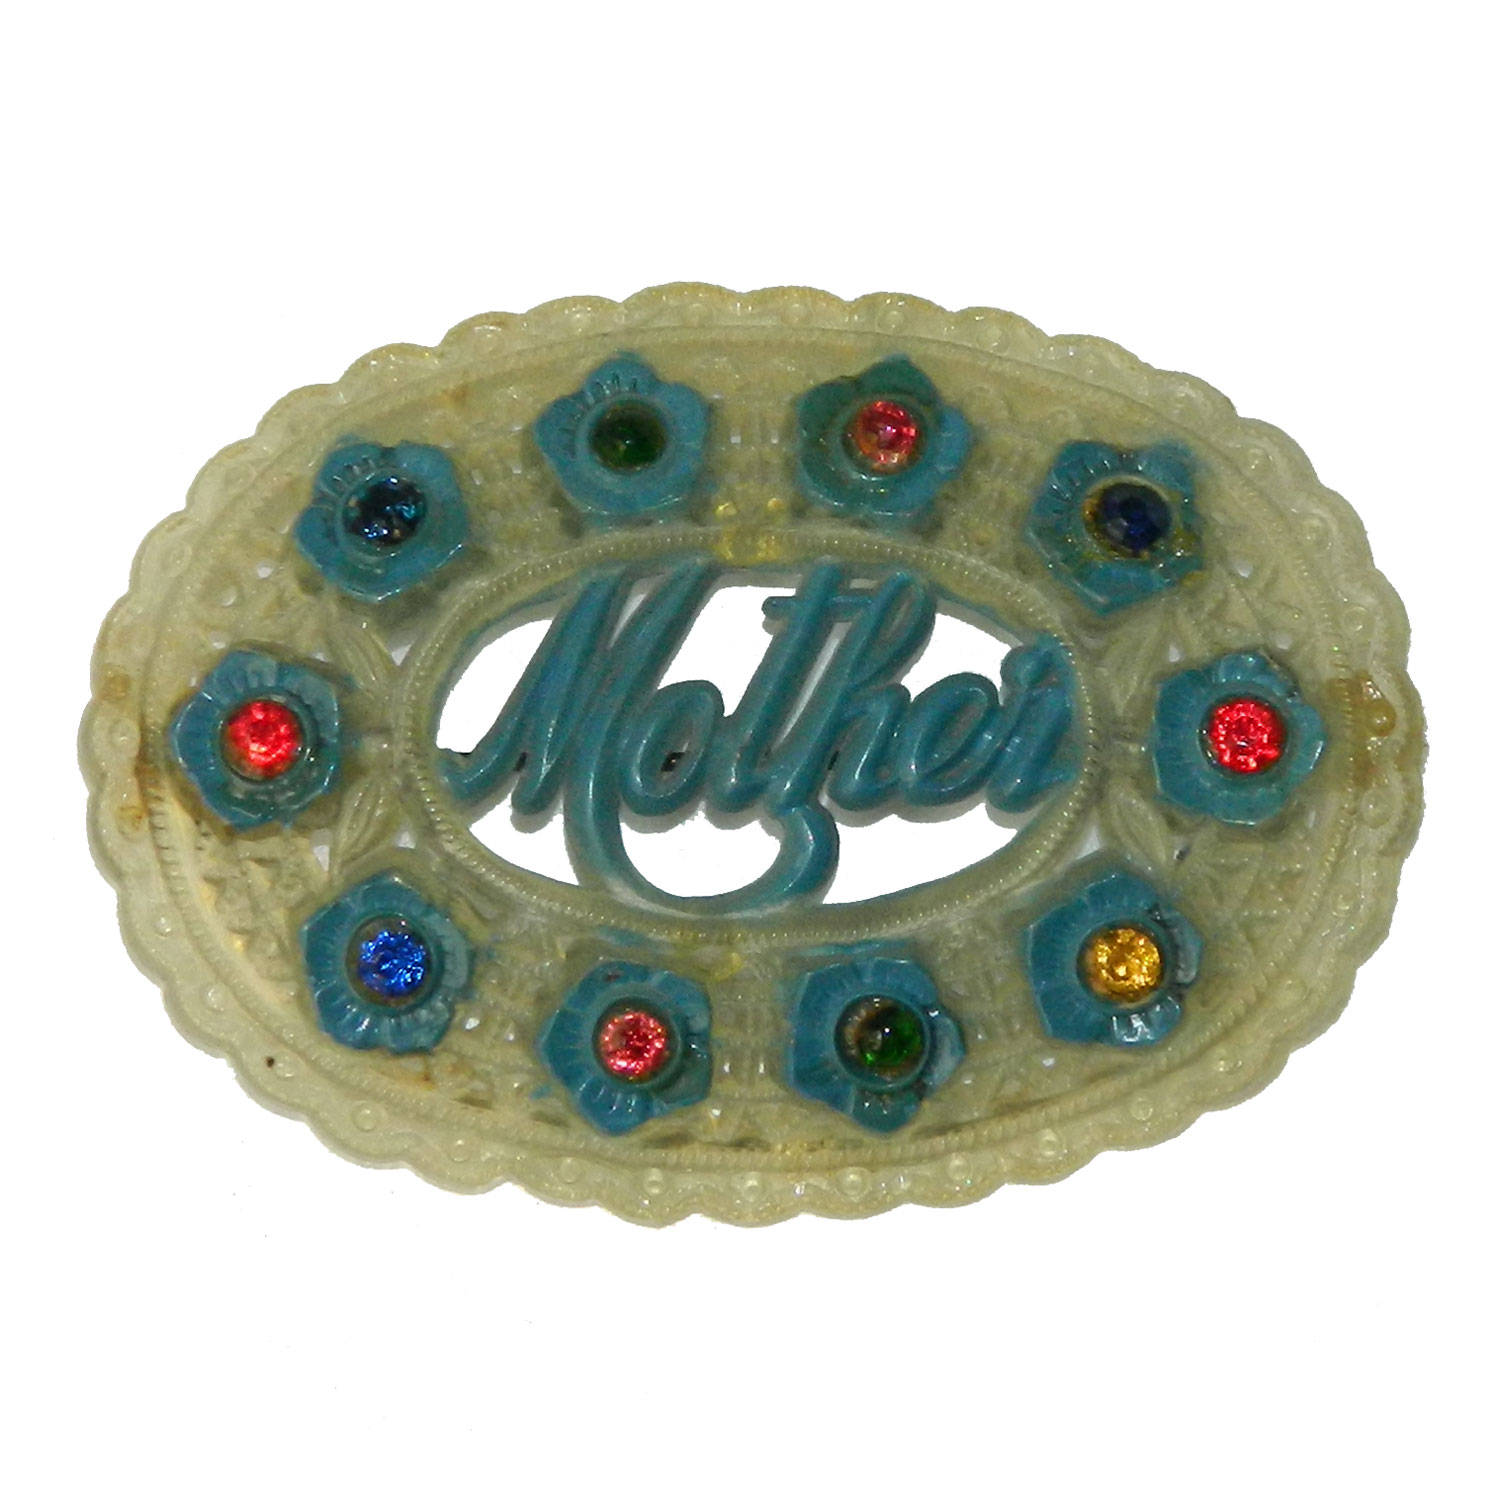 Celluloid Mothers brooch